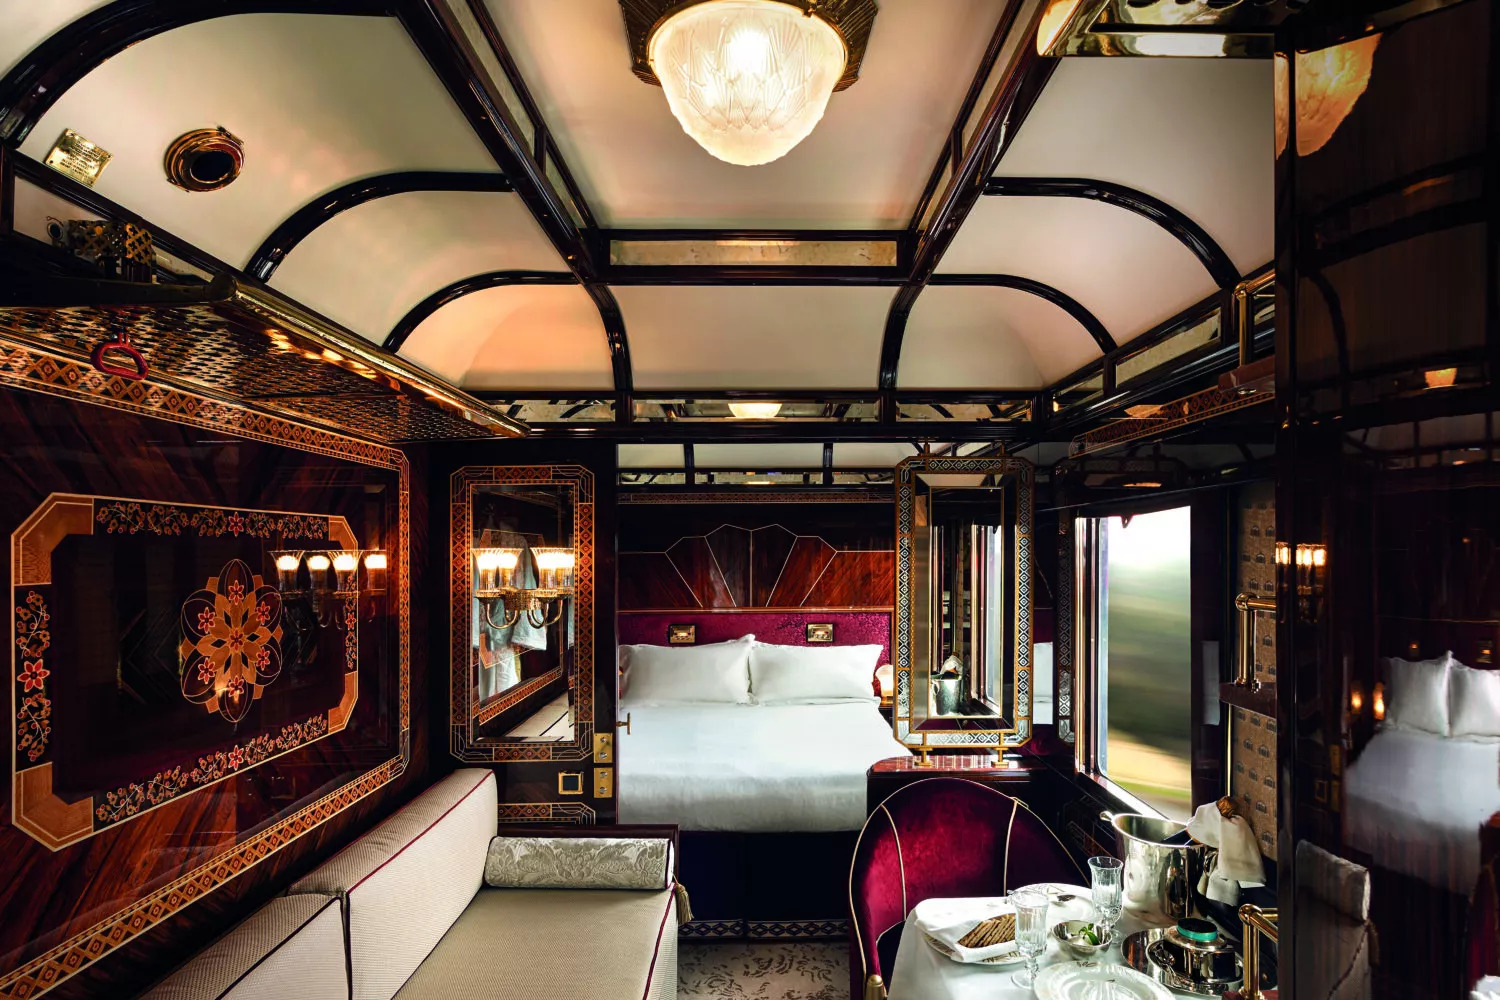 Belmond is a pioneer in luxury travel, operating a multi-service company that originated in 1976 with the purchase of the gorgeous Cipriani hotel in Venice. 